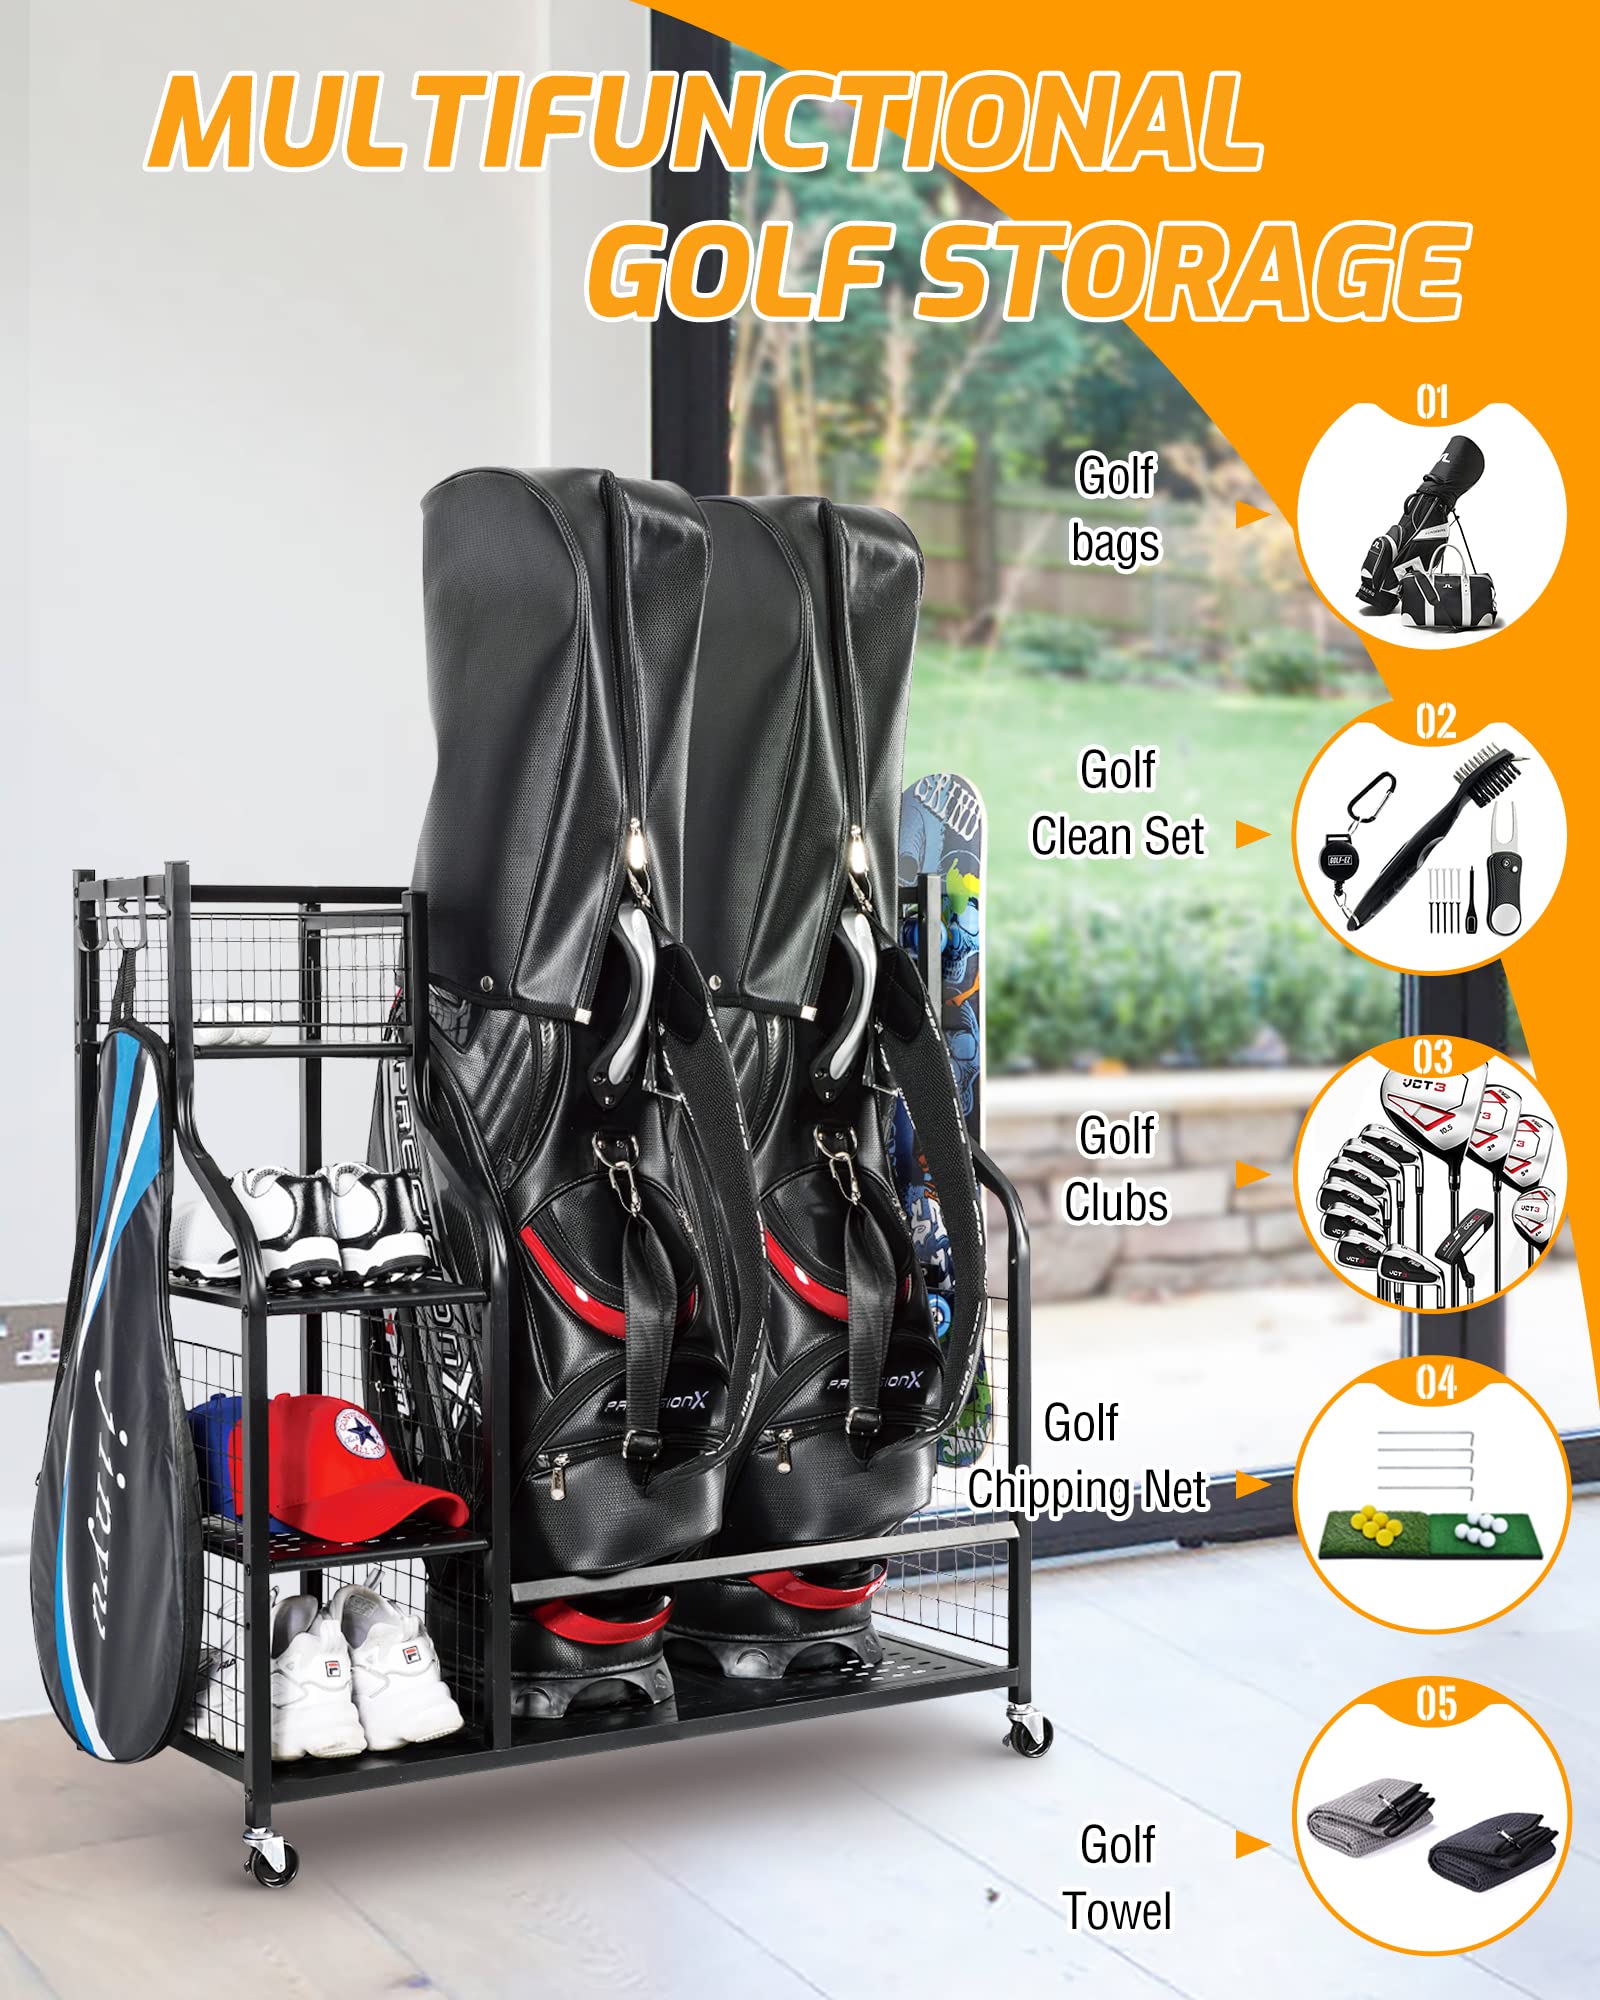 PLKOW Golf Bag Storage Garage Organizer, Fit for 2 Golf Bags and Golf Accessories